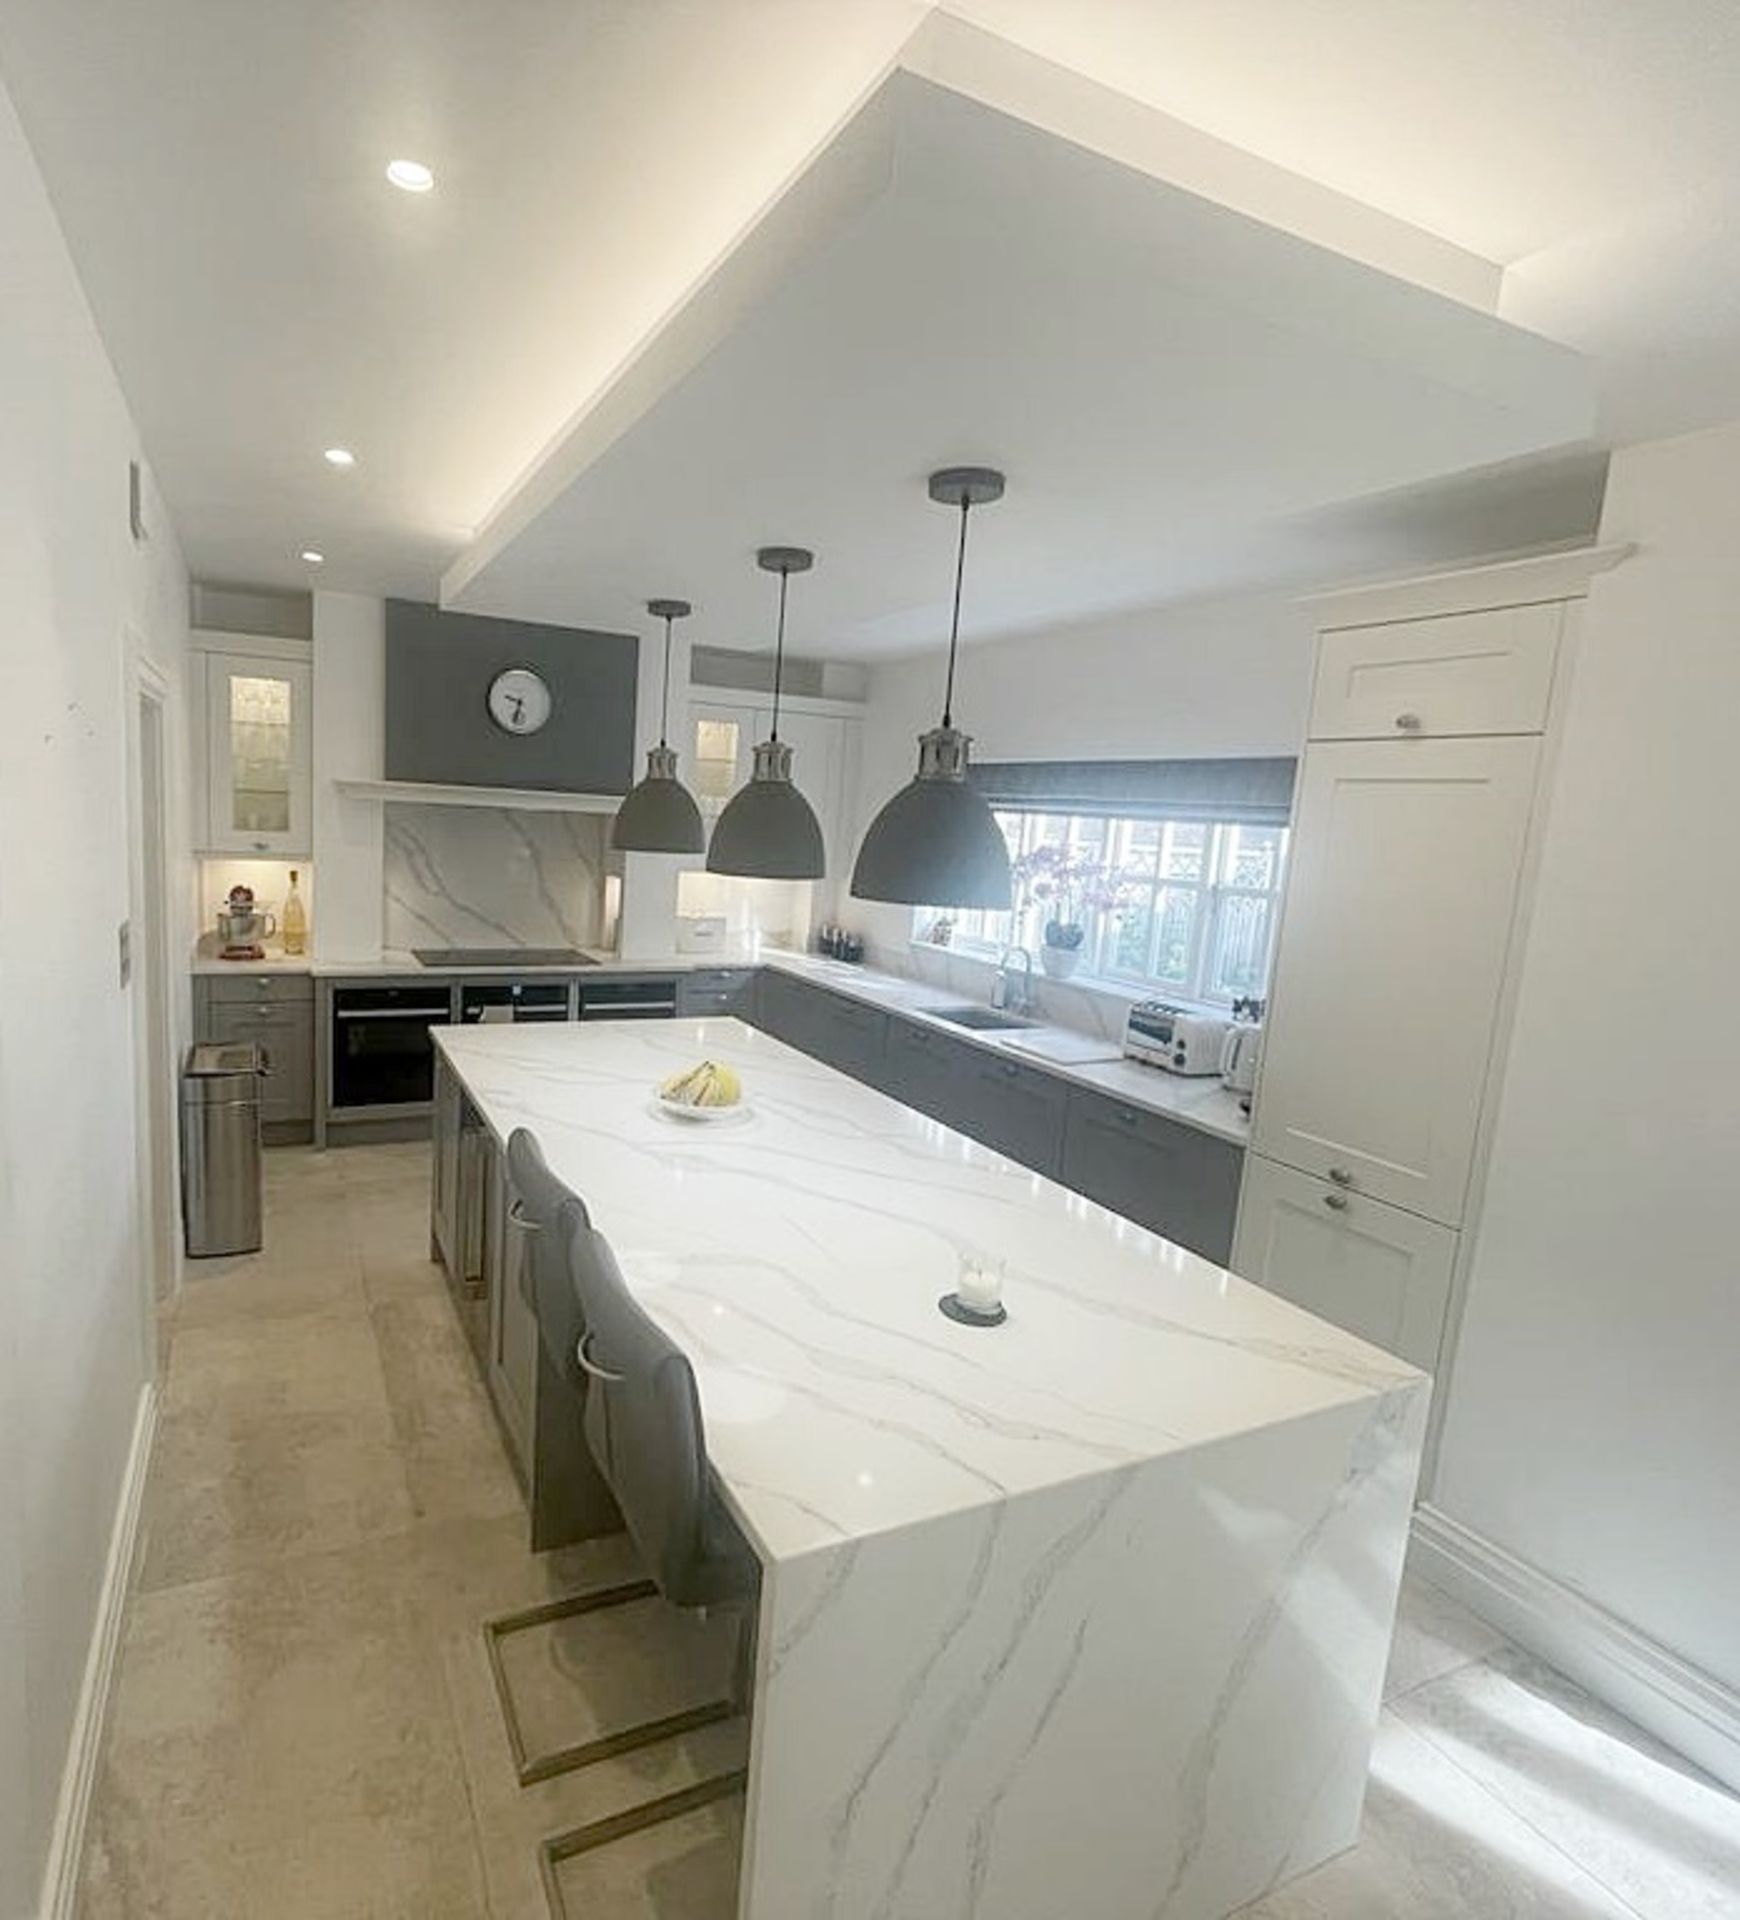 1 x SIEMATIC Bespoke Shaker-style Fitted Kitchen, Utility Room, Appliances & Modern Quartz Surfaces - Image 125 of 153